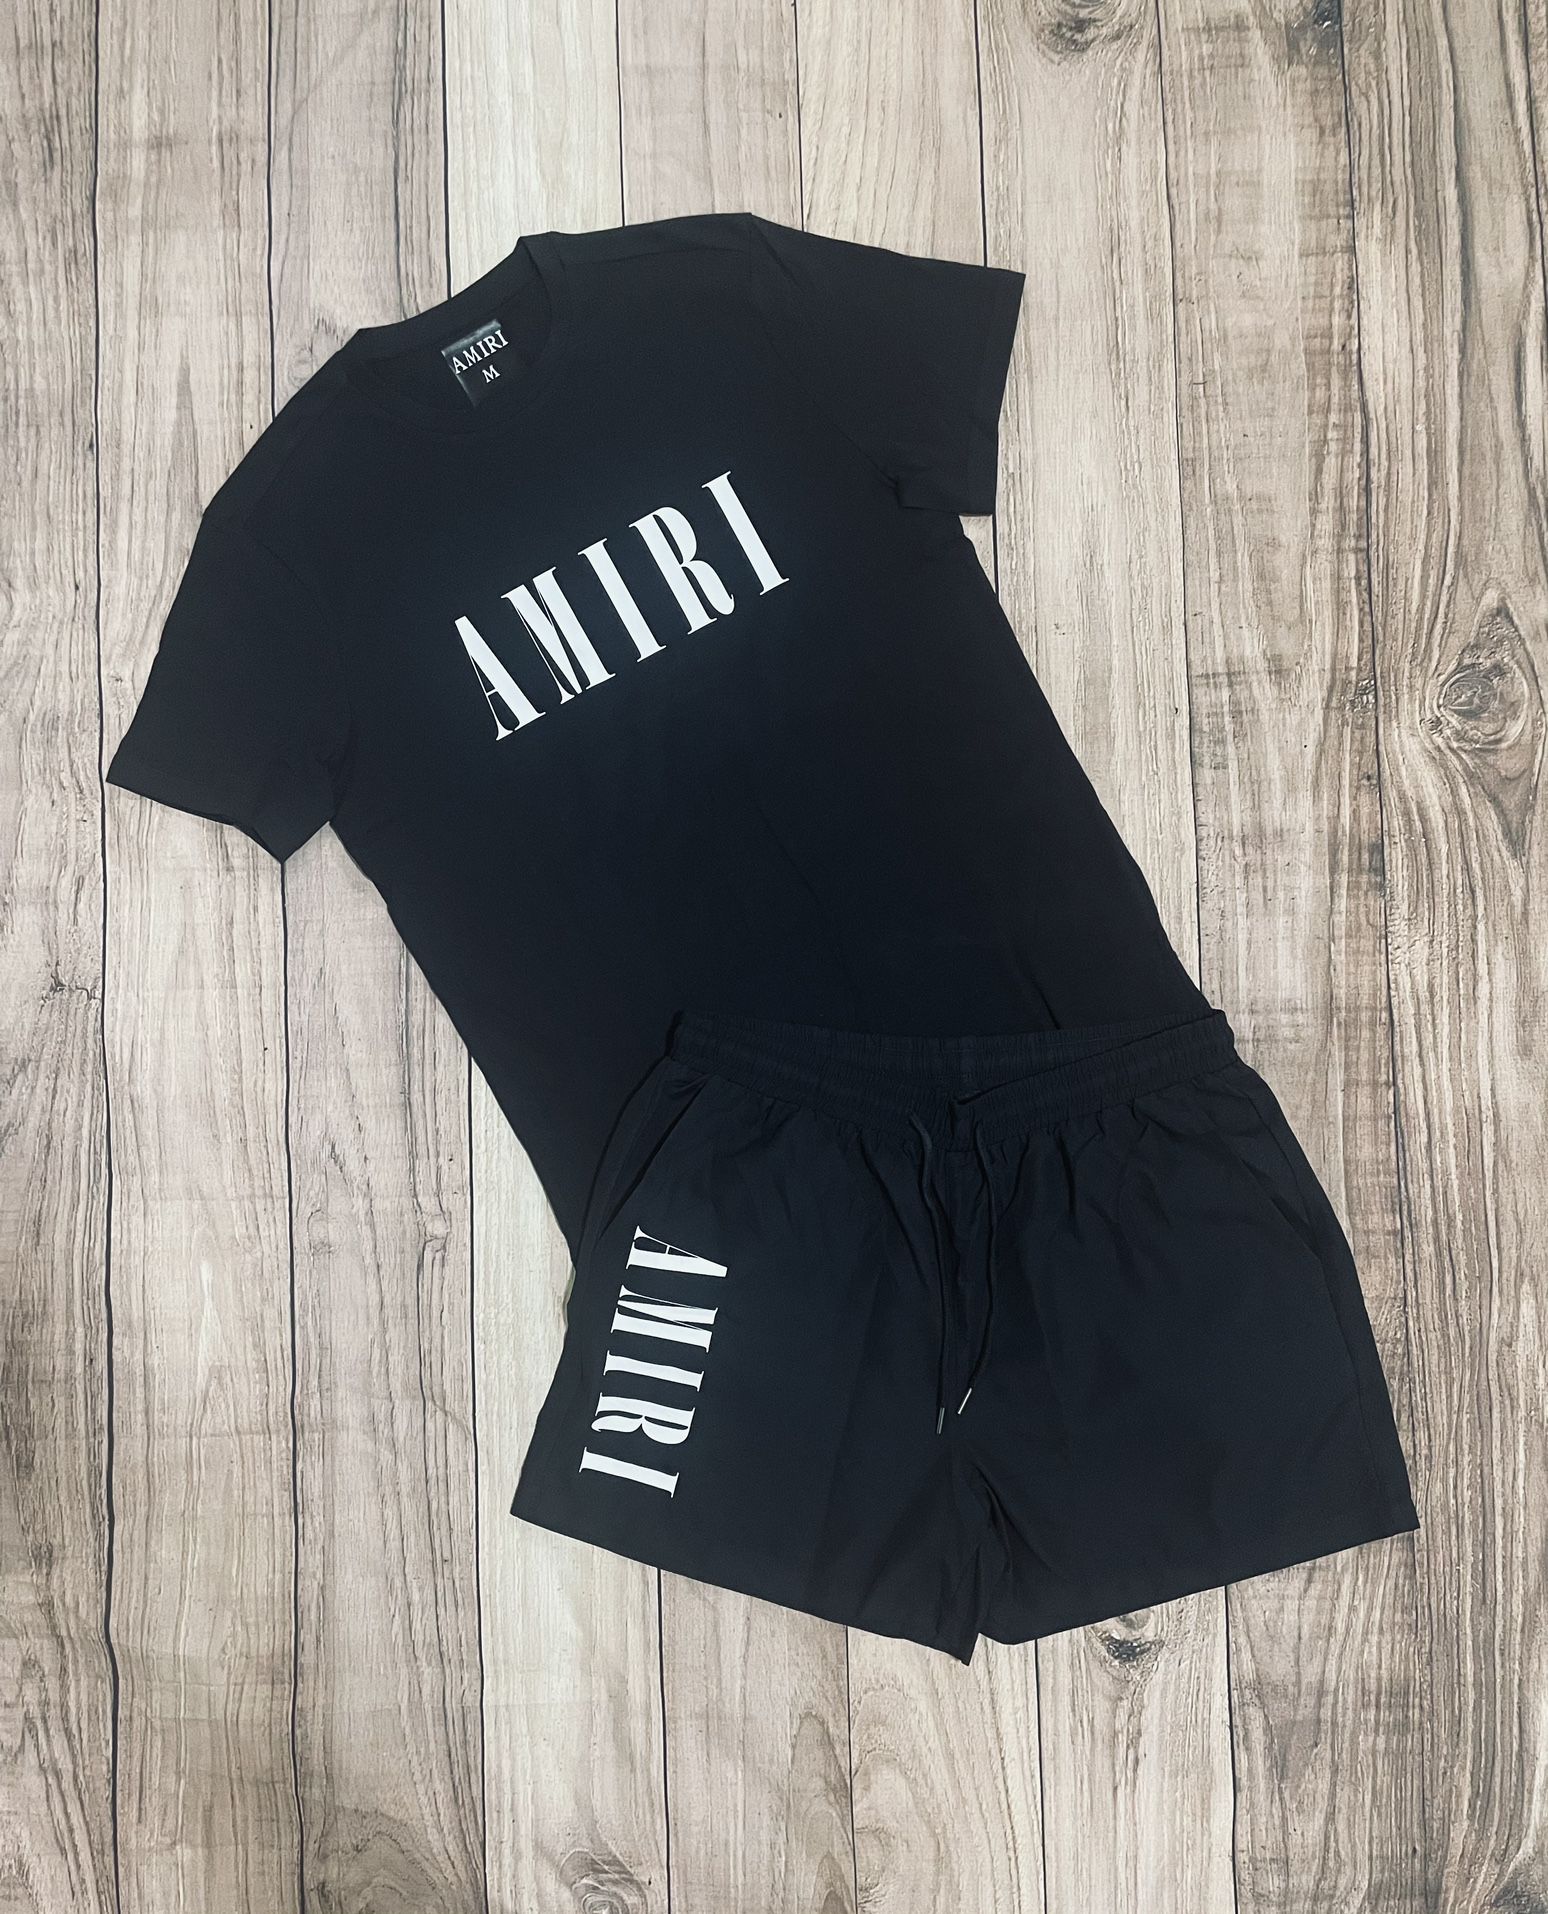 Amiri T-shirt Black And White for Sale in Hialeah Gardens, FL - OfferUp